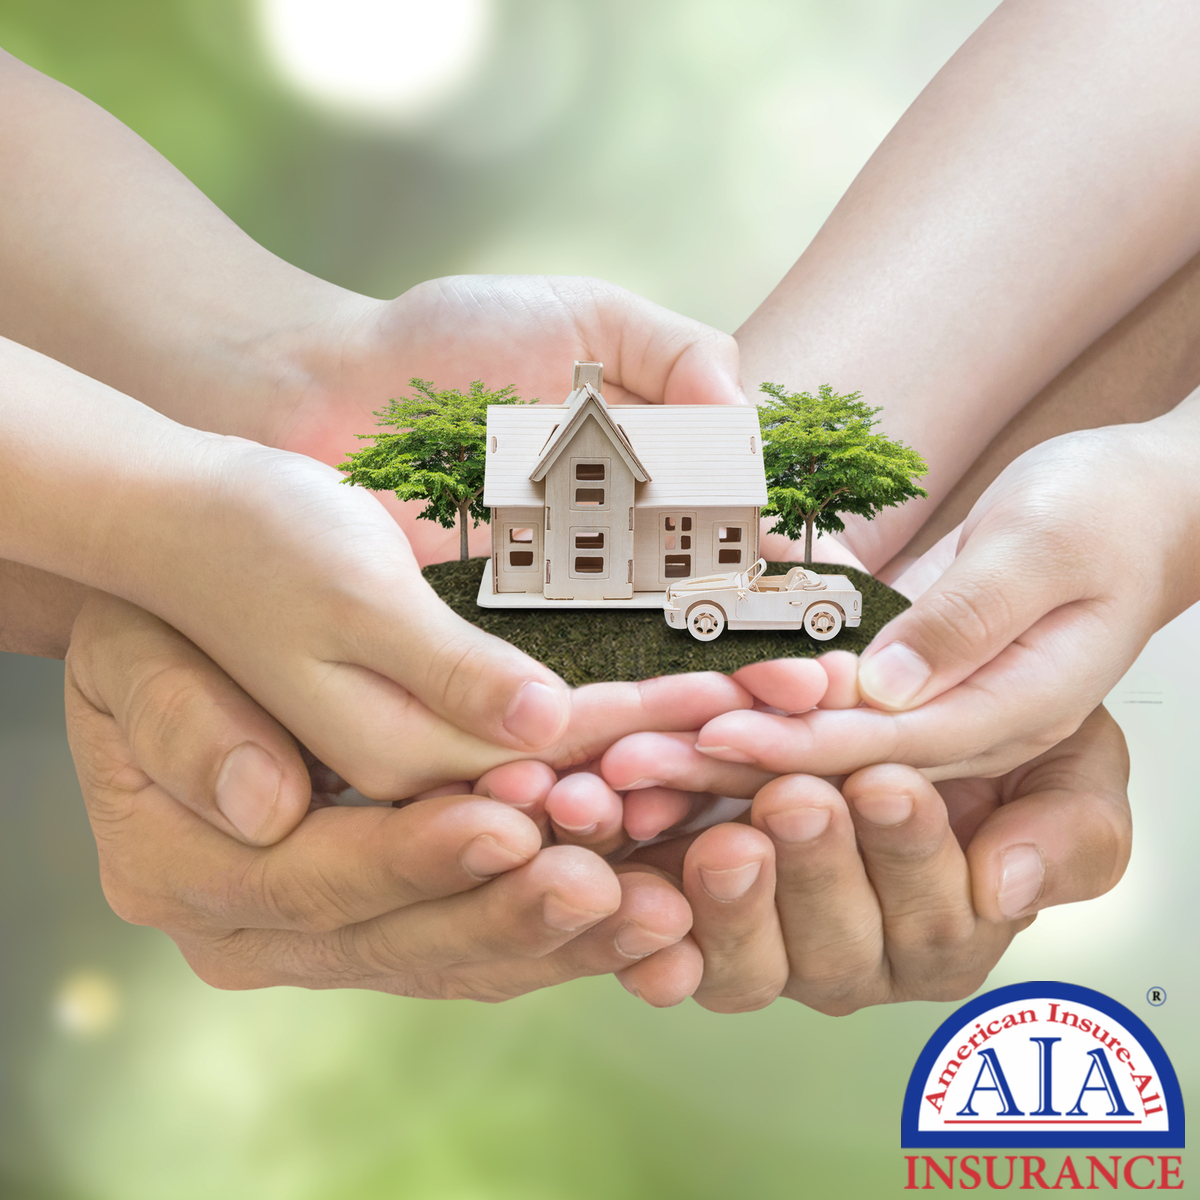 Is American Insure-All® an Experienced Homeowner’s Insurance Company Near Stanwood?